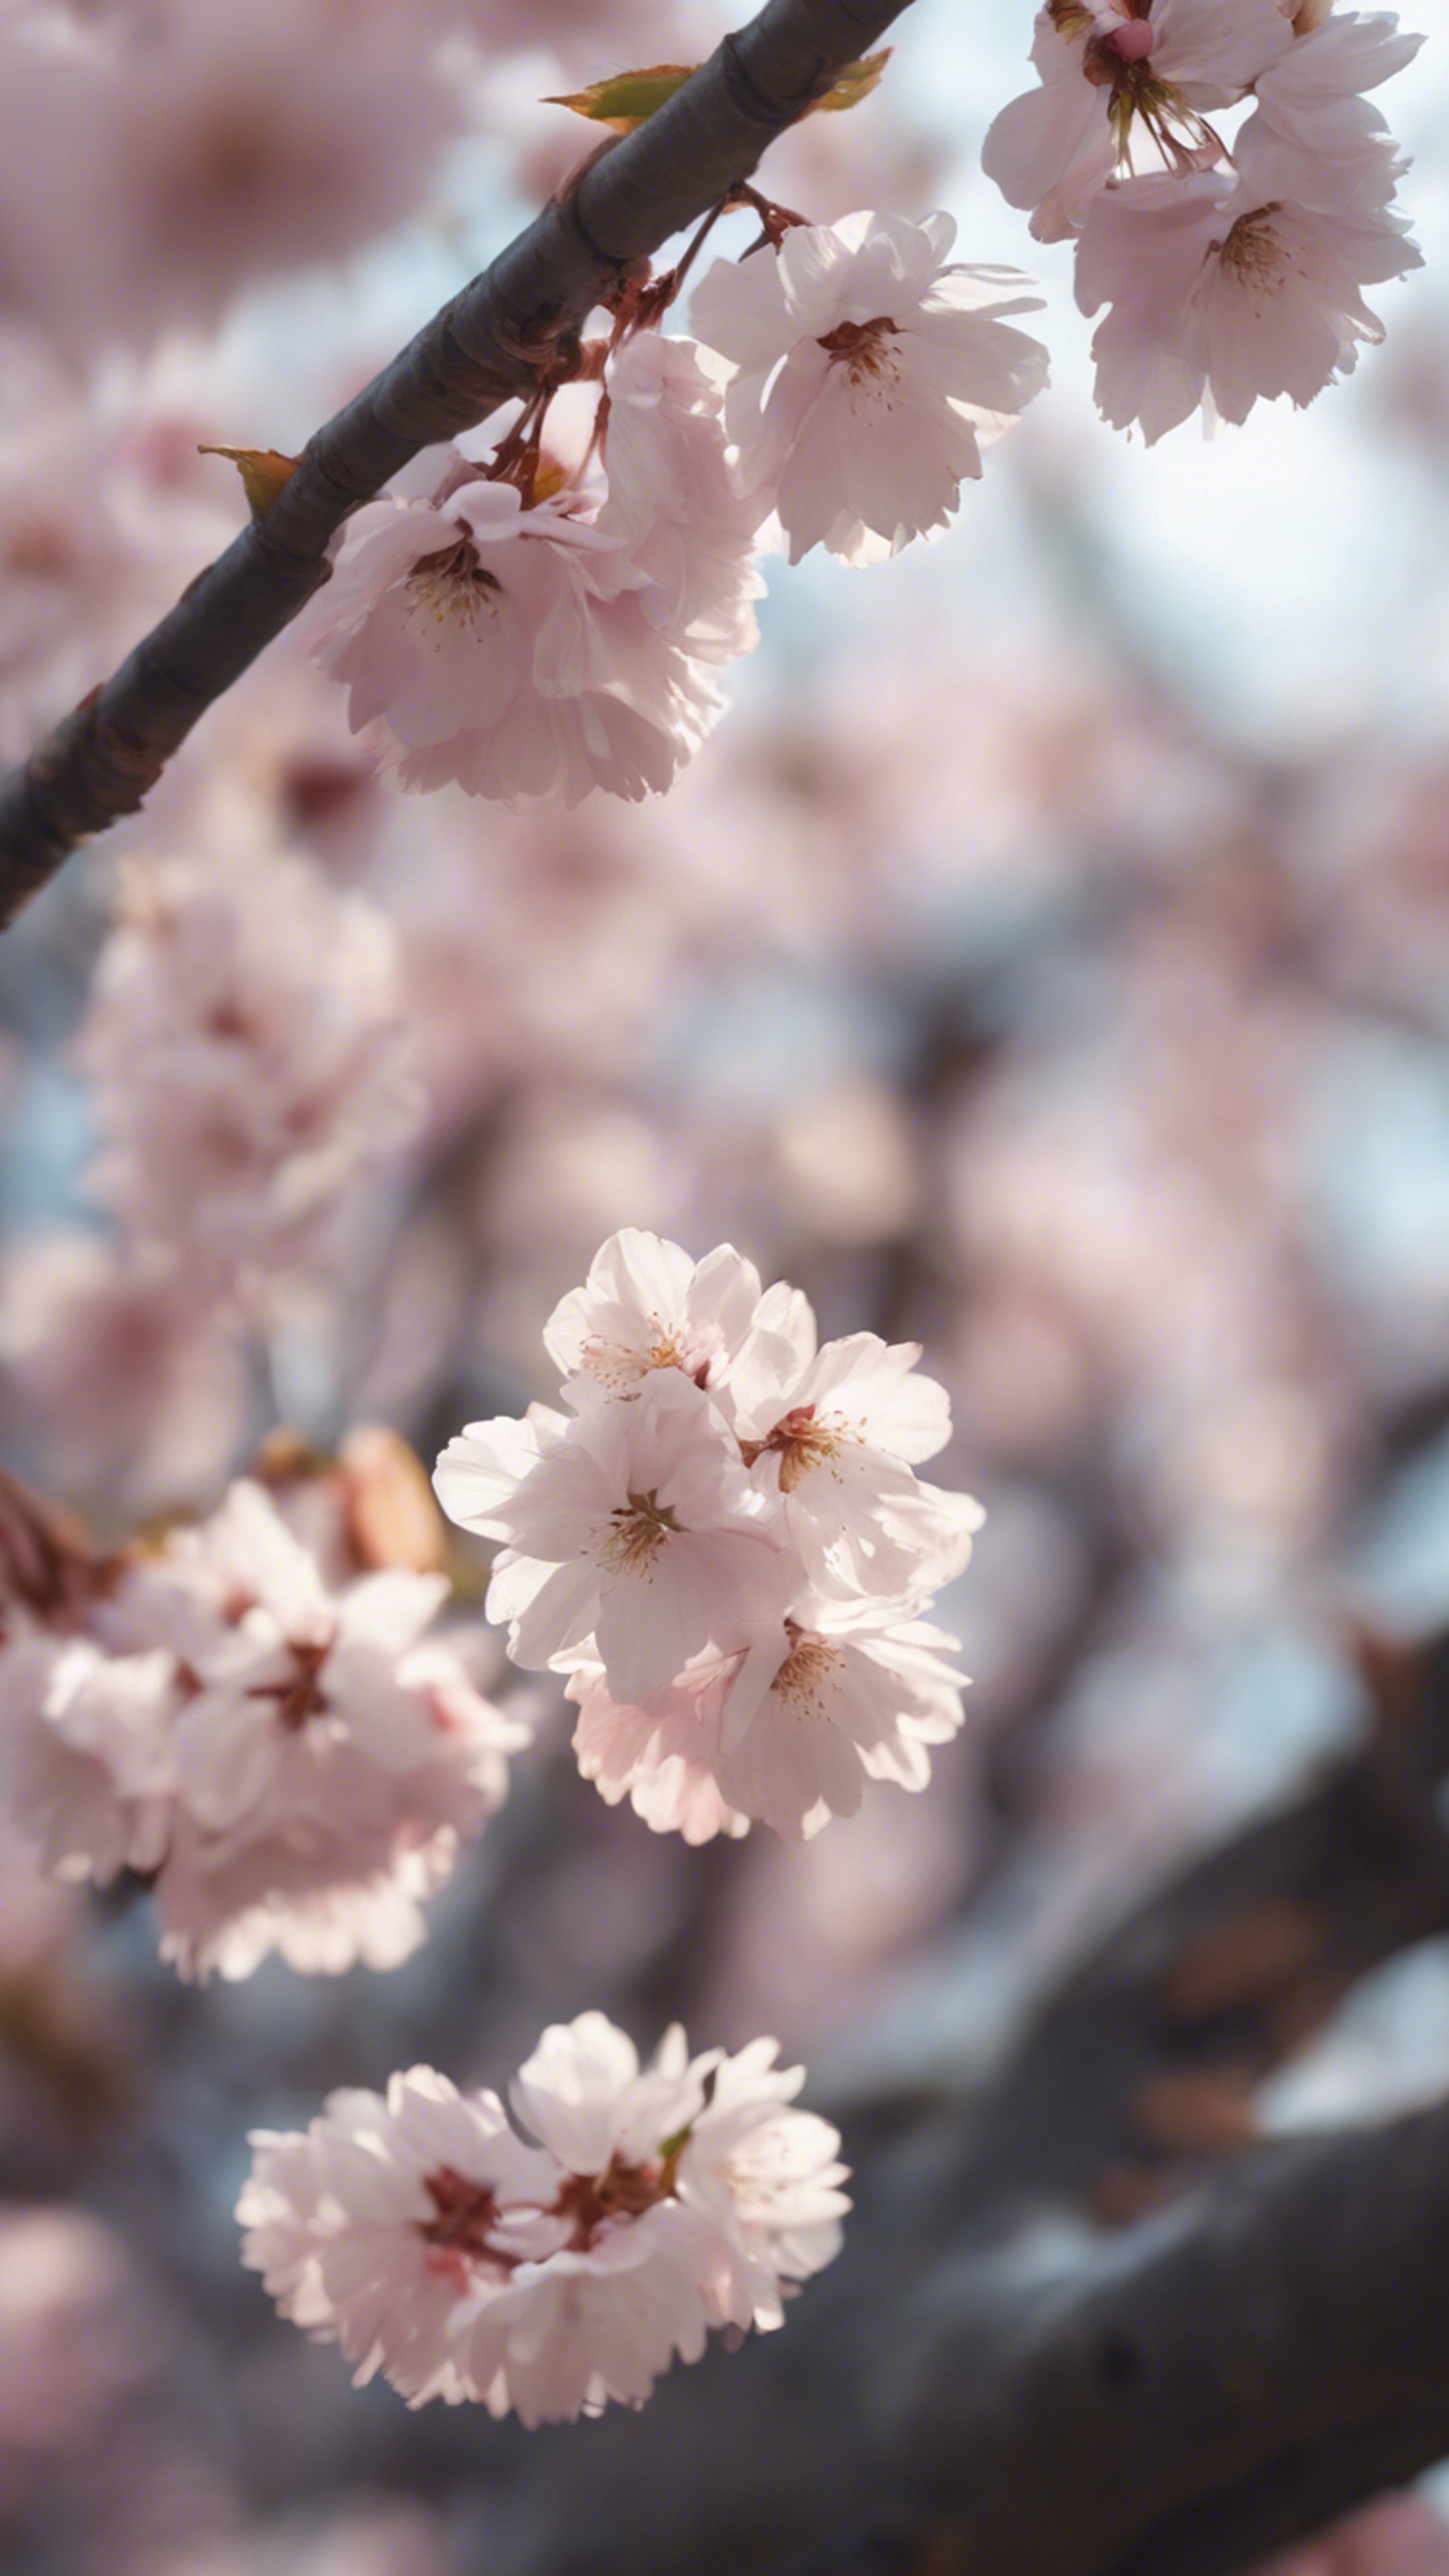 A close-up view of cherry blossom petals falling gently from the tree. Обои[73cf20157d554b6991b4]